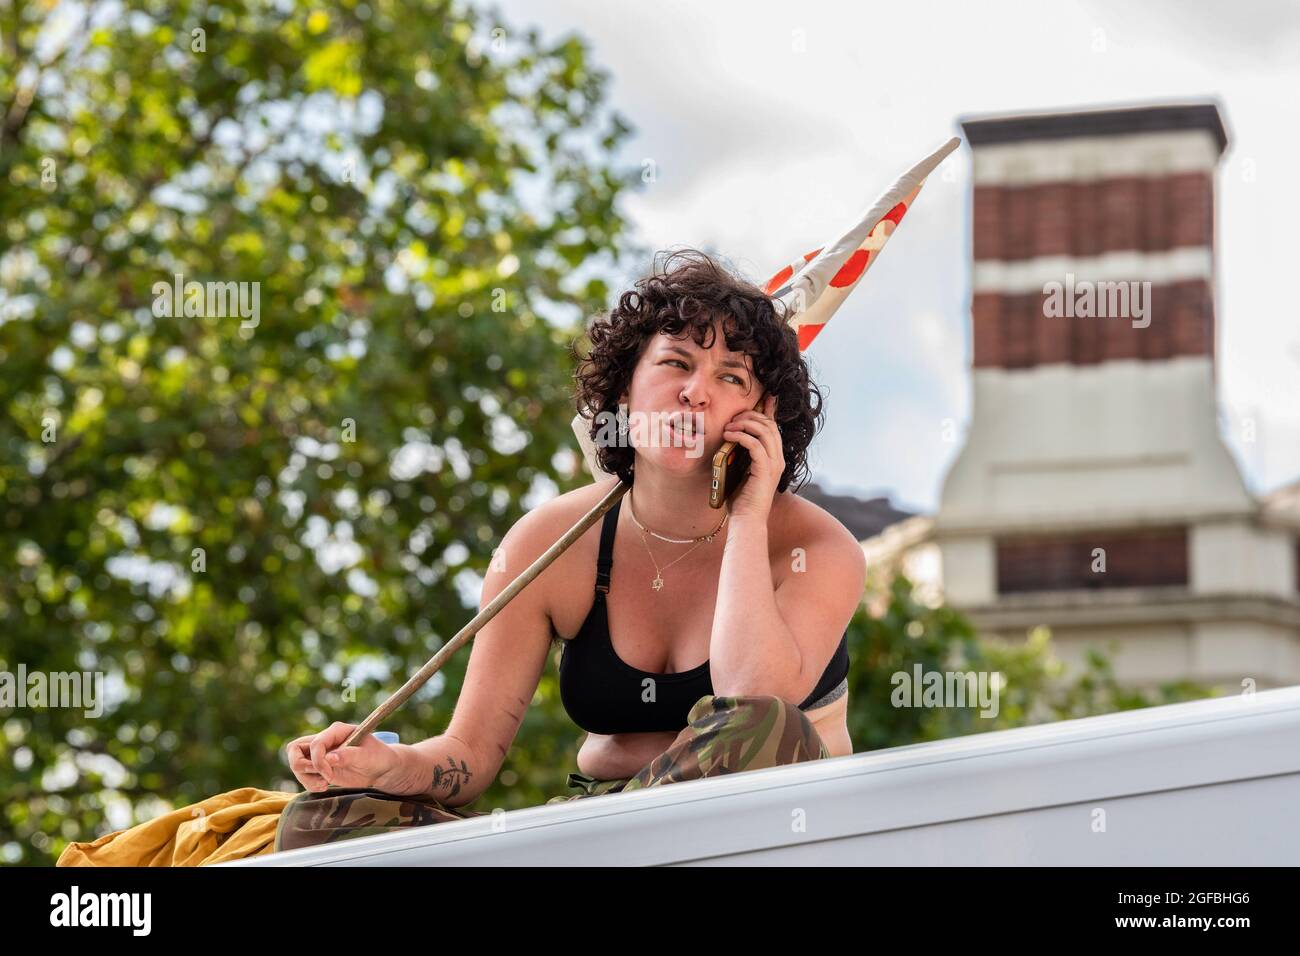 London, UK. 24th Aug, 2021. A protester on the roof of a van chats on her phone at Cambridge Circus, during the demonstration.‘The Impossible Rebellion' protest against climate change, global warming, which plans to target the root cause of the climate and ecological crisis and to demand the government divest from fossil fuel companies by Extinction Rebellion. (Photo by Dave Rushen/SOPA Images/Sipa USA) Credit: Sipa USA/Alamy Live News Stock Photo